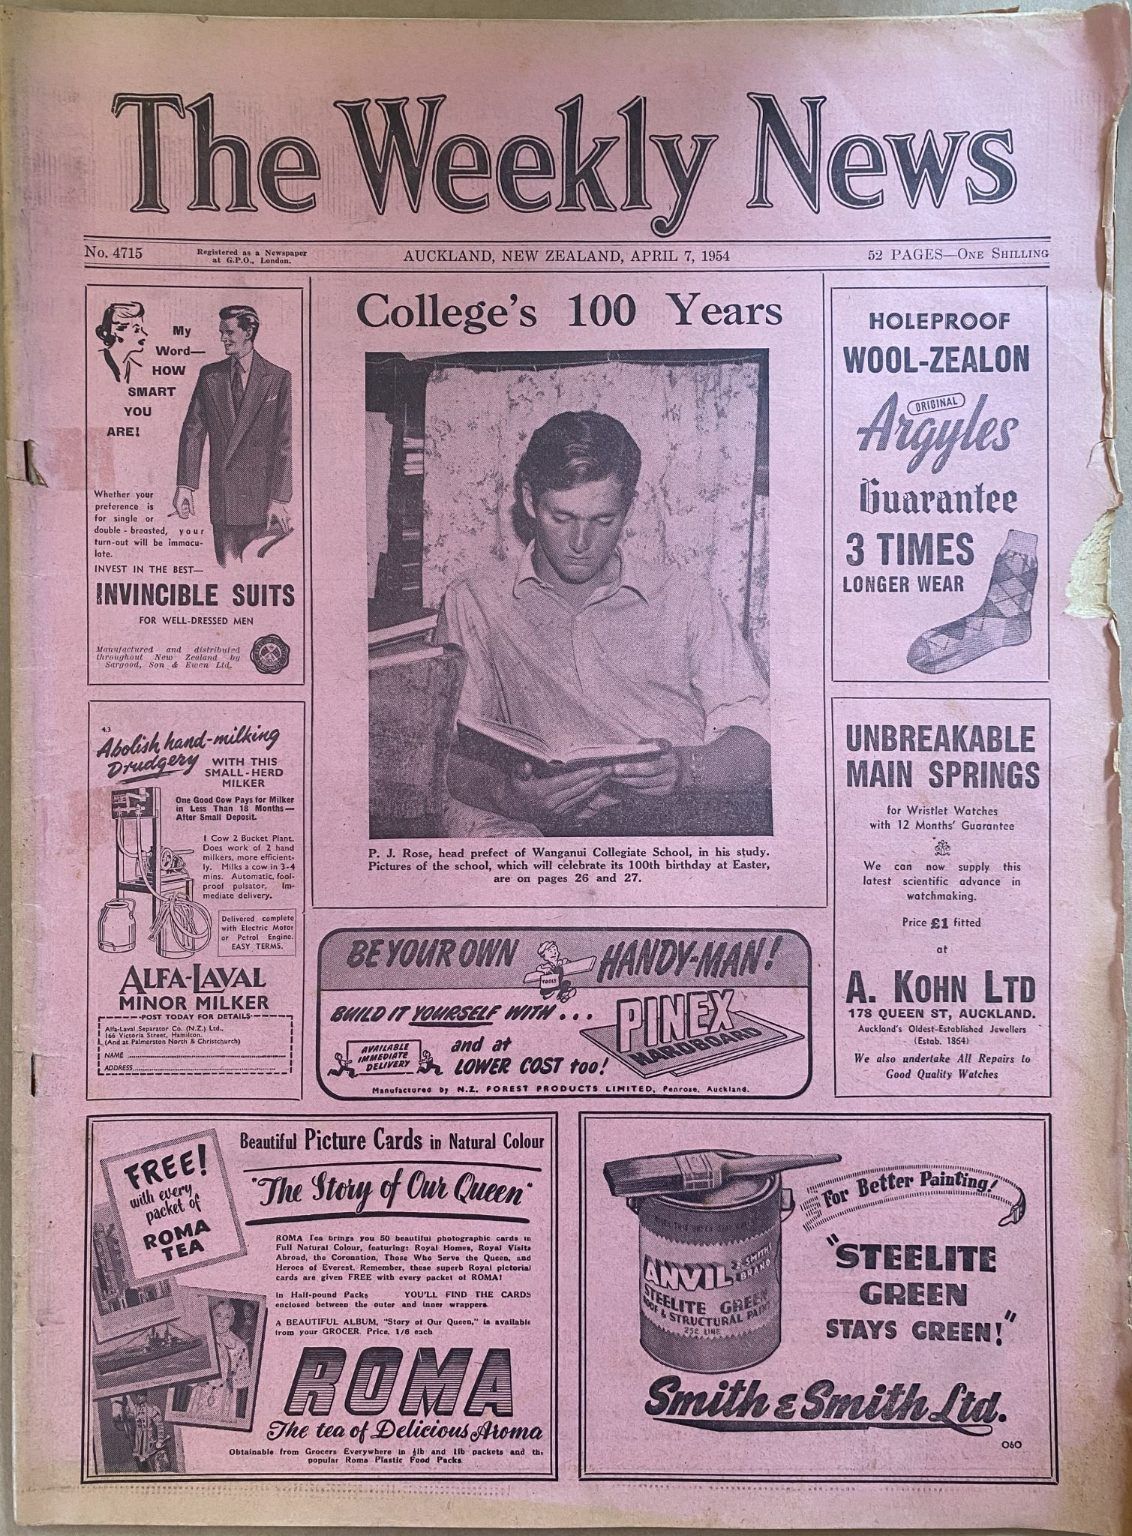 OLD NEWSPAPER: The Weekly News - No. 4715, 7 April 1954